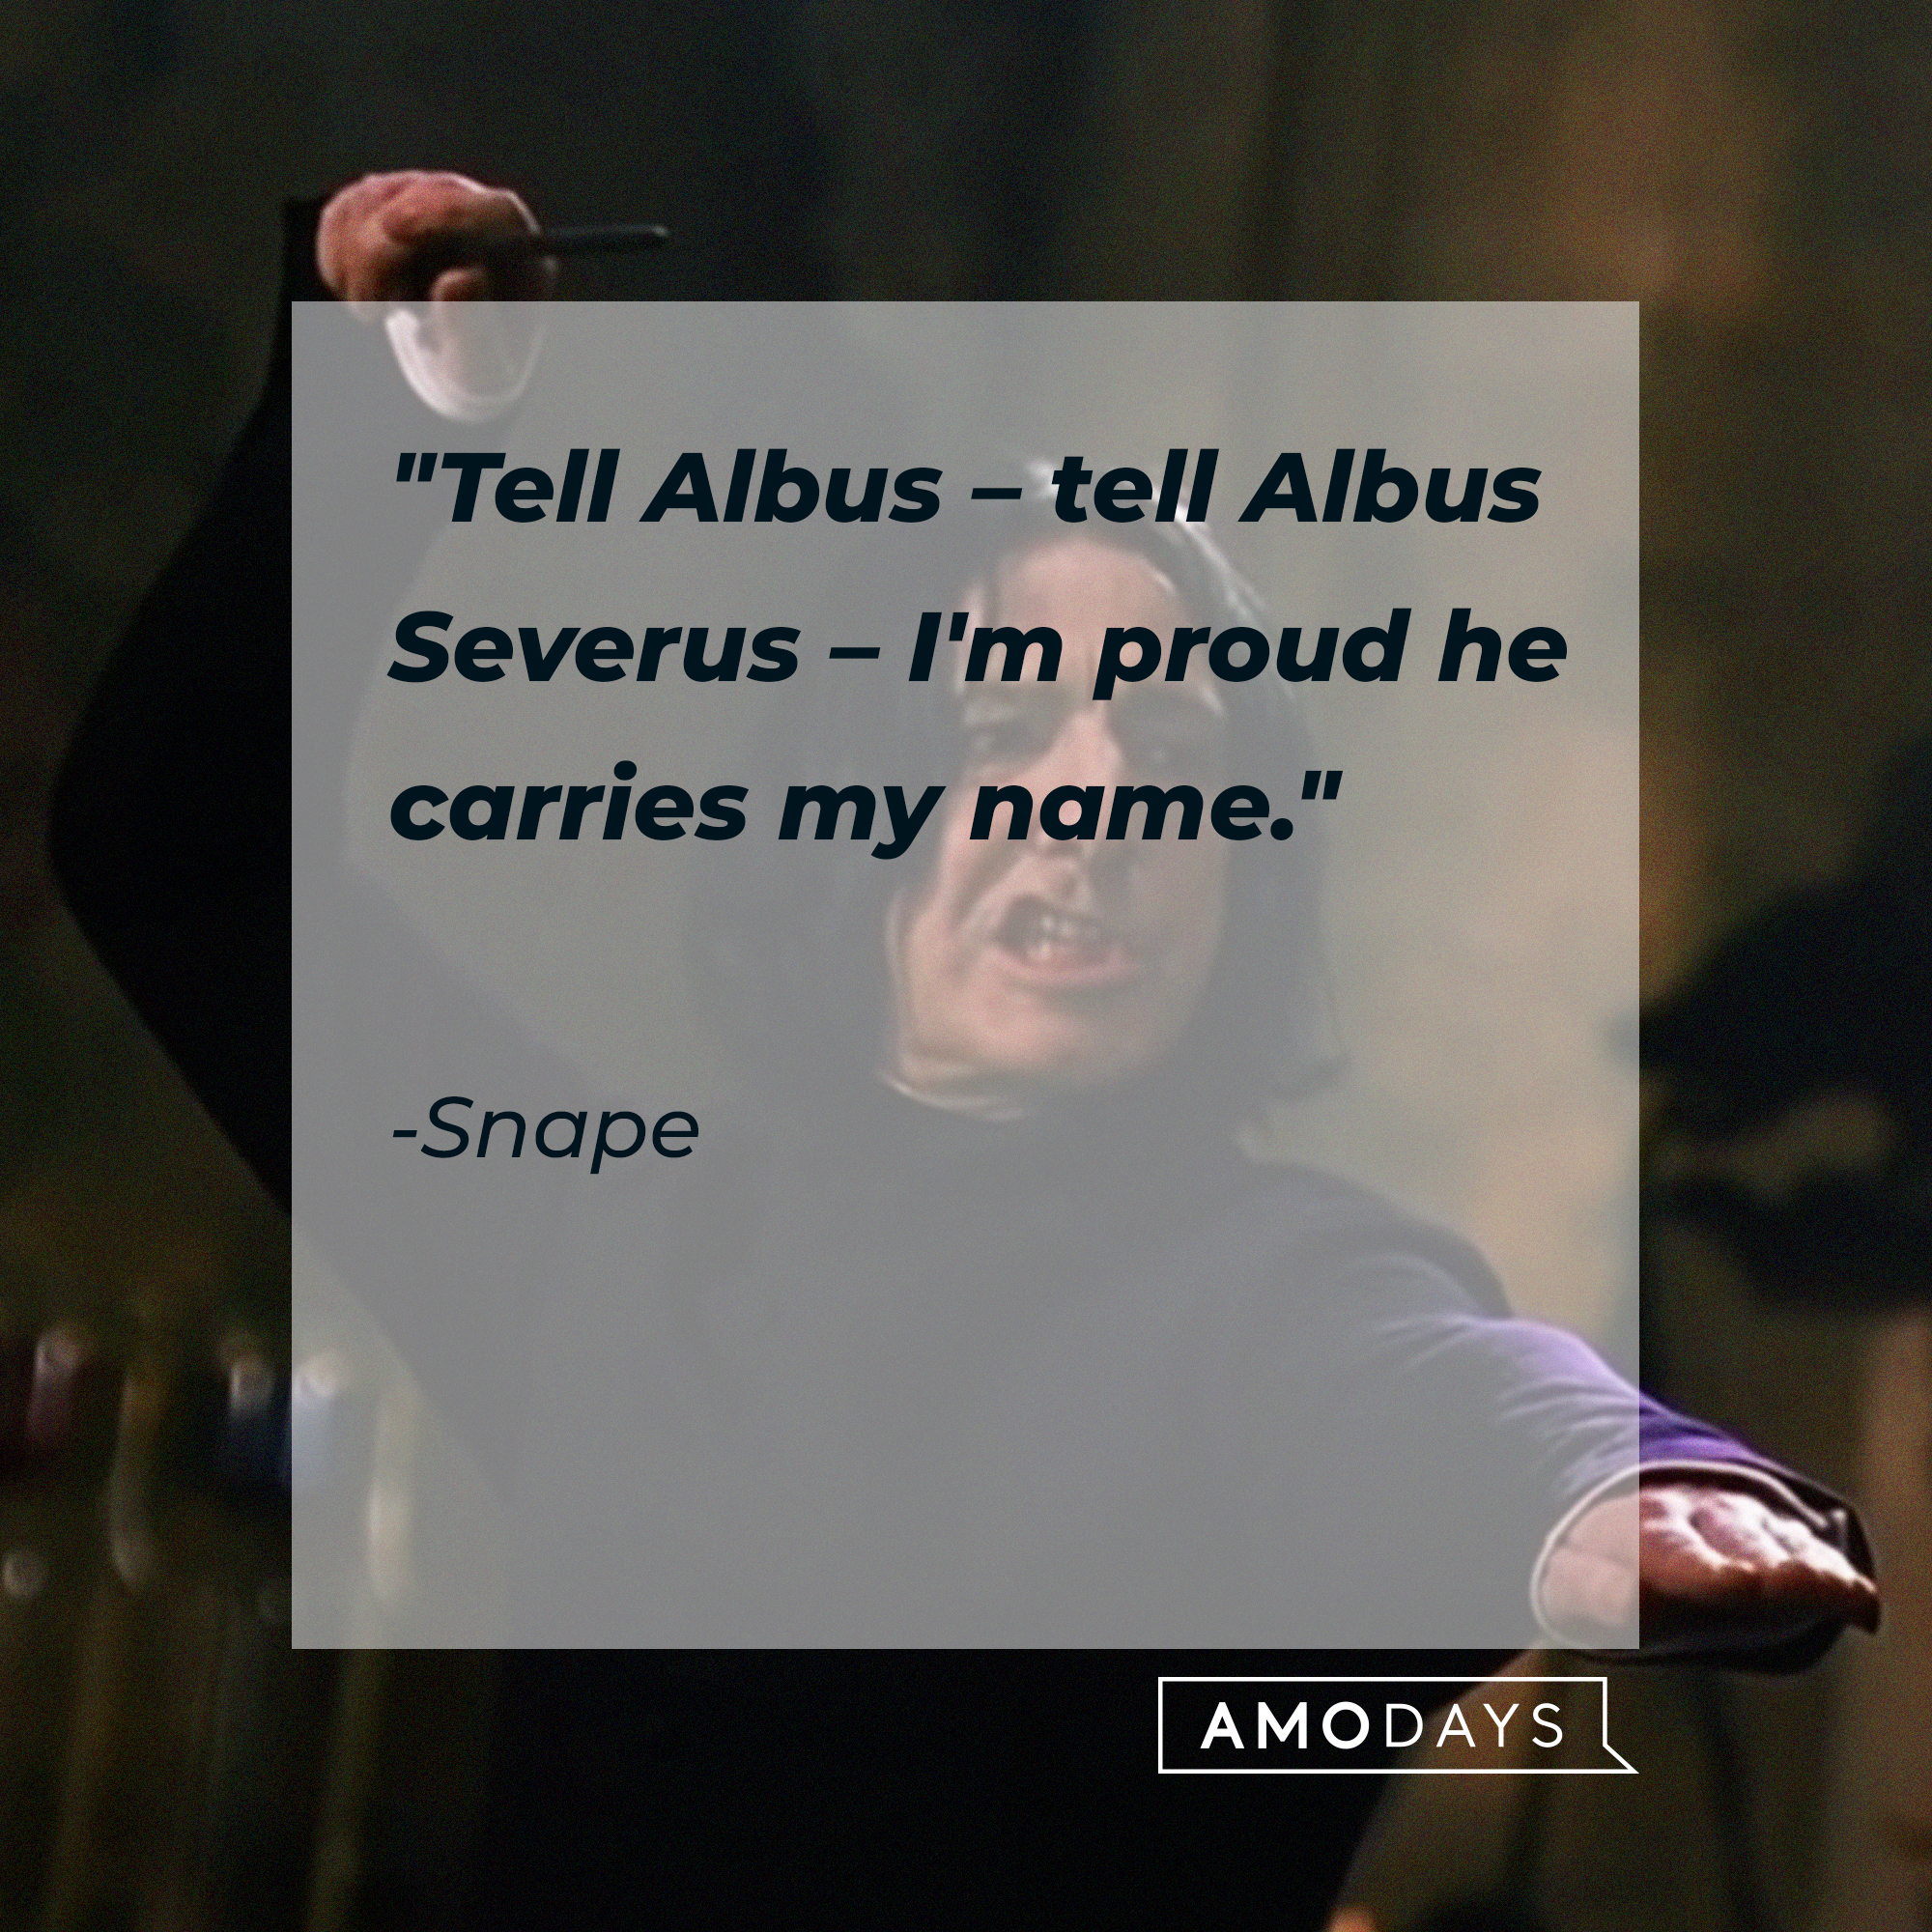 A photo of Severus Snape with his quote, "Tell Albus – tell Albus Severus – I'm proud he carries my name" | Source: YouTube/harrypotter